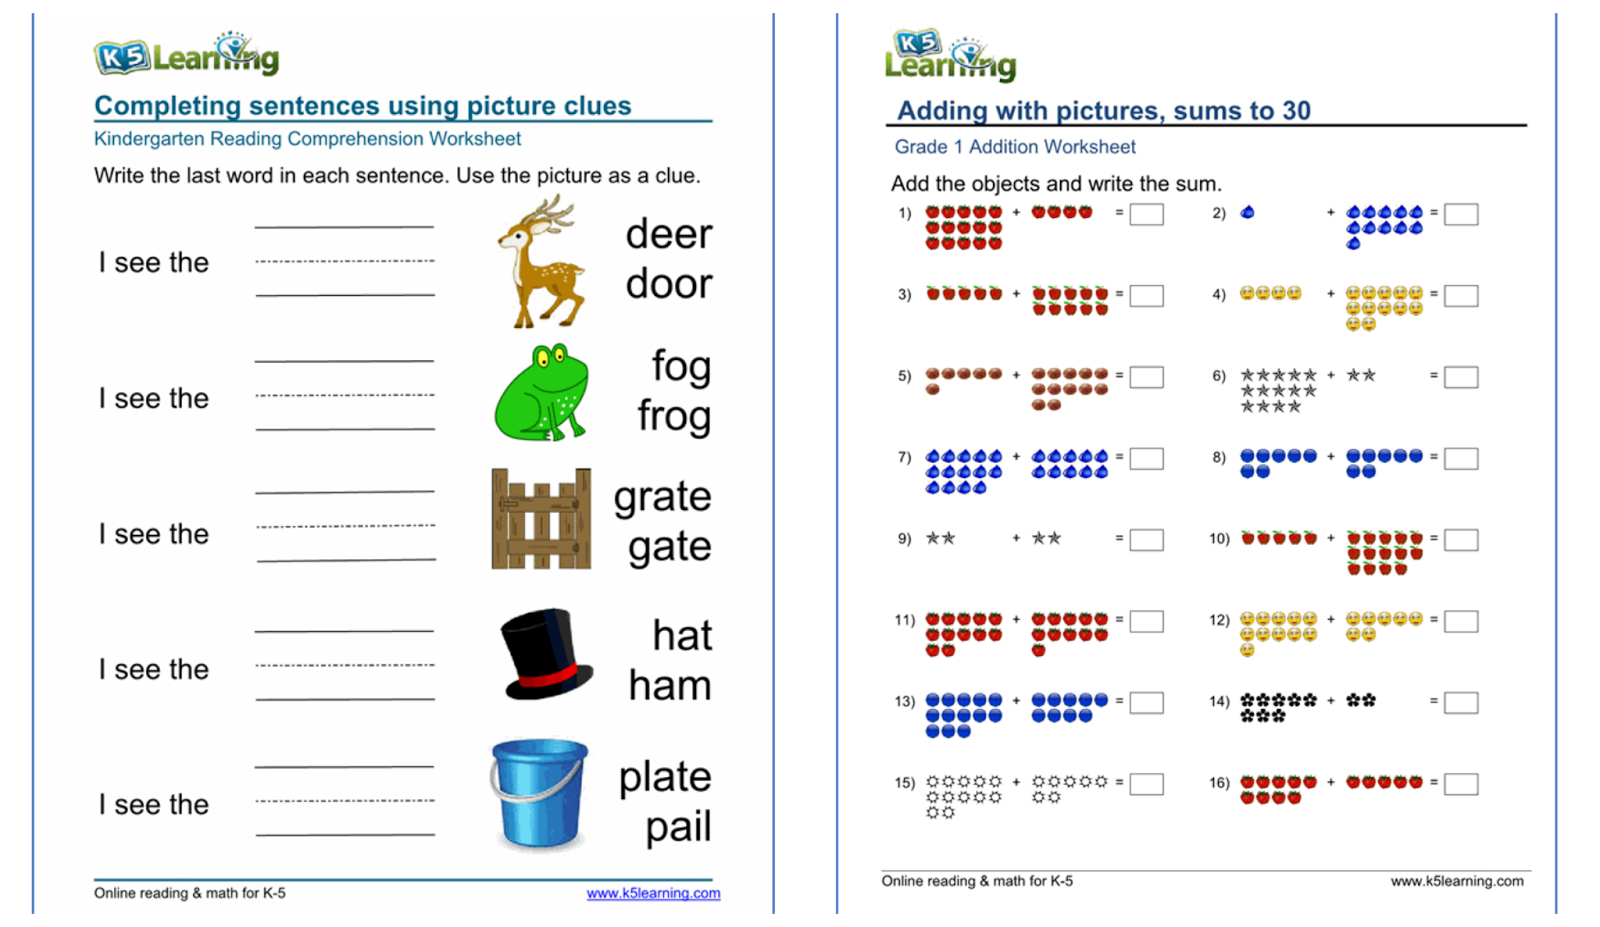 online-math-and-reading-enrichment-program-for-kids-k5-learning-review